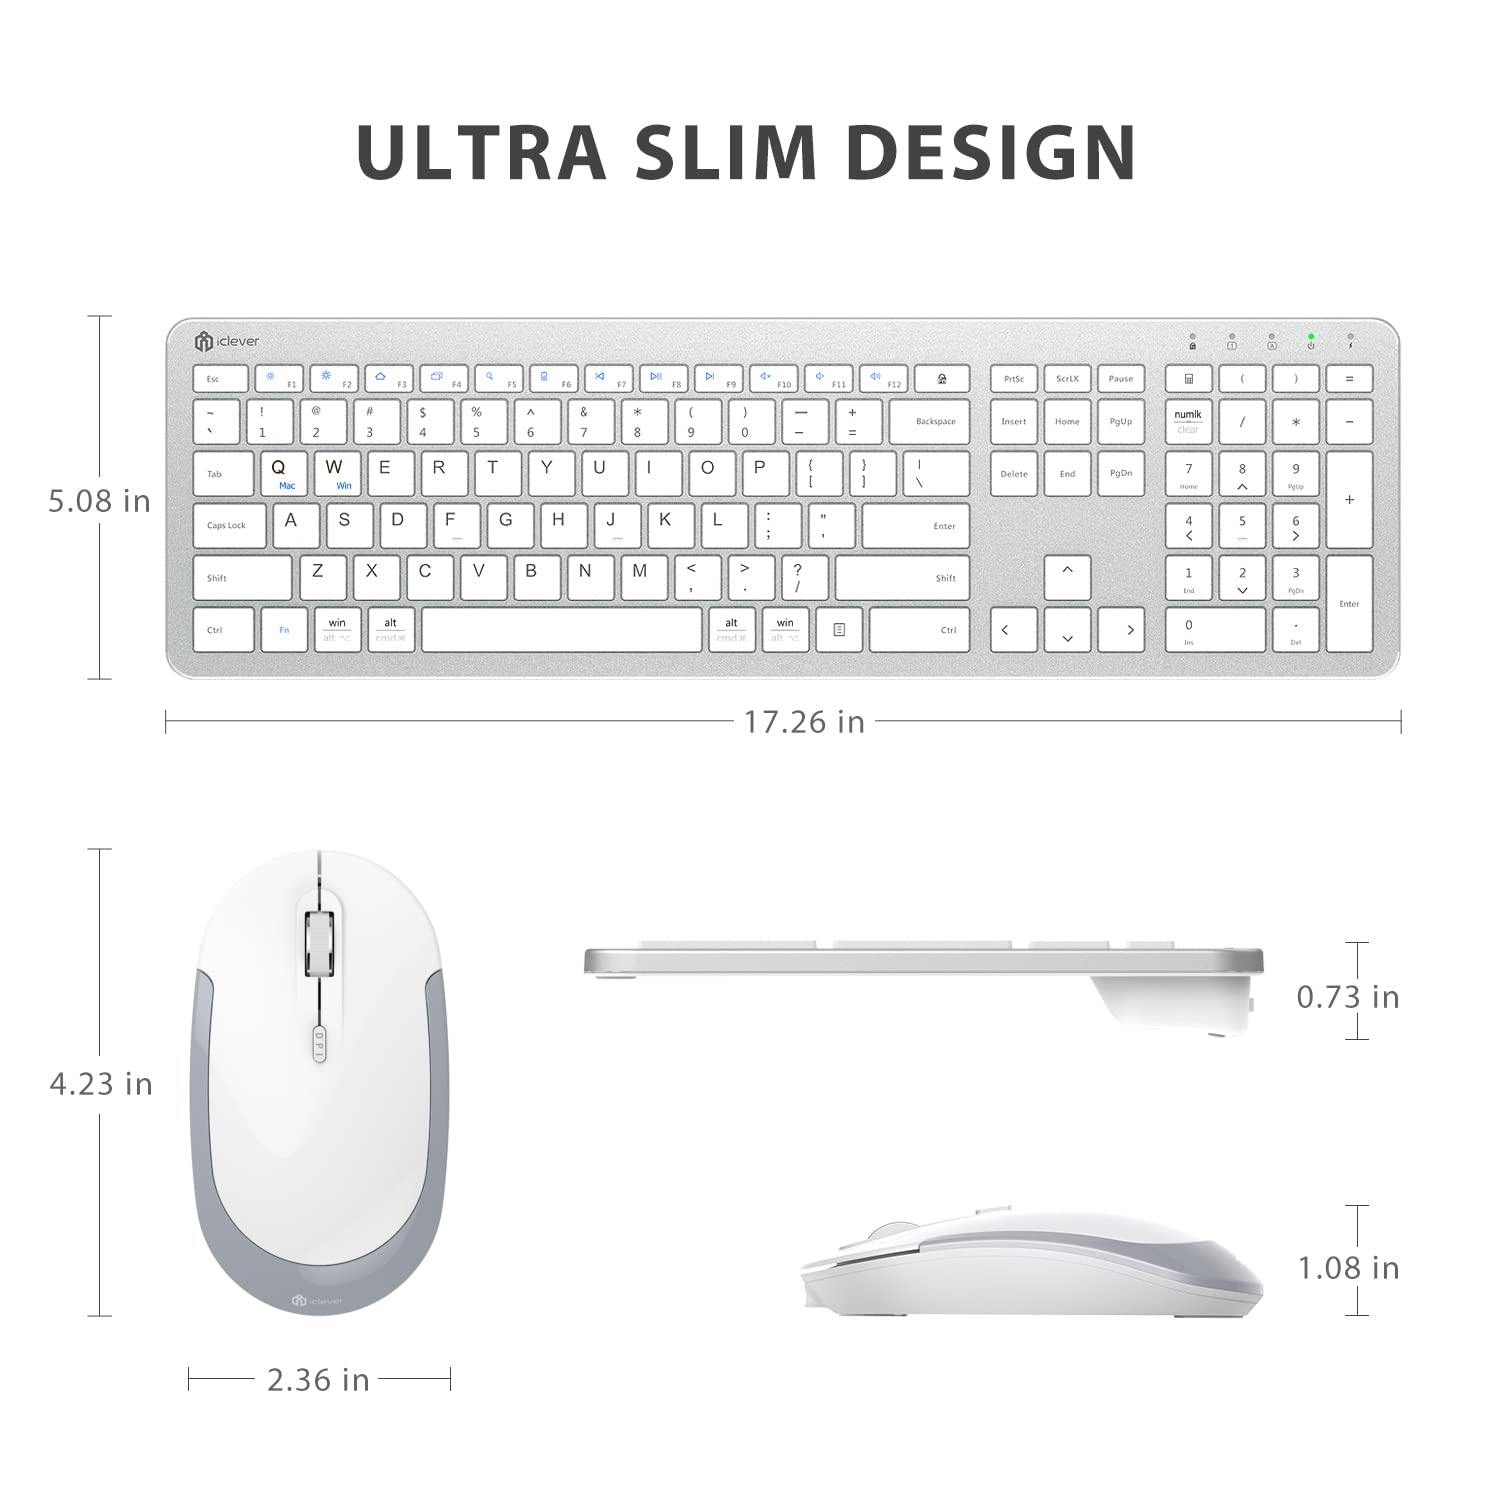 iClever GK08 Wireless Keyboard and Mouse - Rechargeable, Ergonomic, Quiet, Full Size Design with Number Pad, 2.4G Stable Connection Slim Mac Keyboard and Mouse for Windows Mac OS Computer